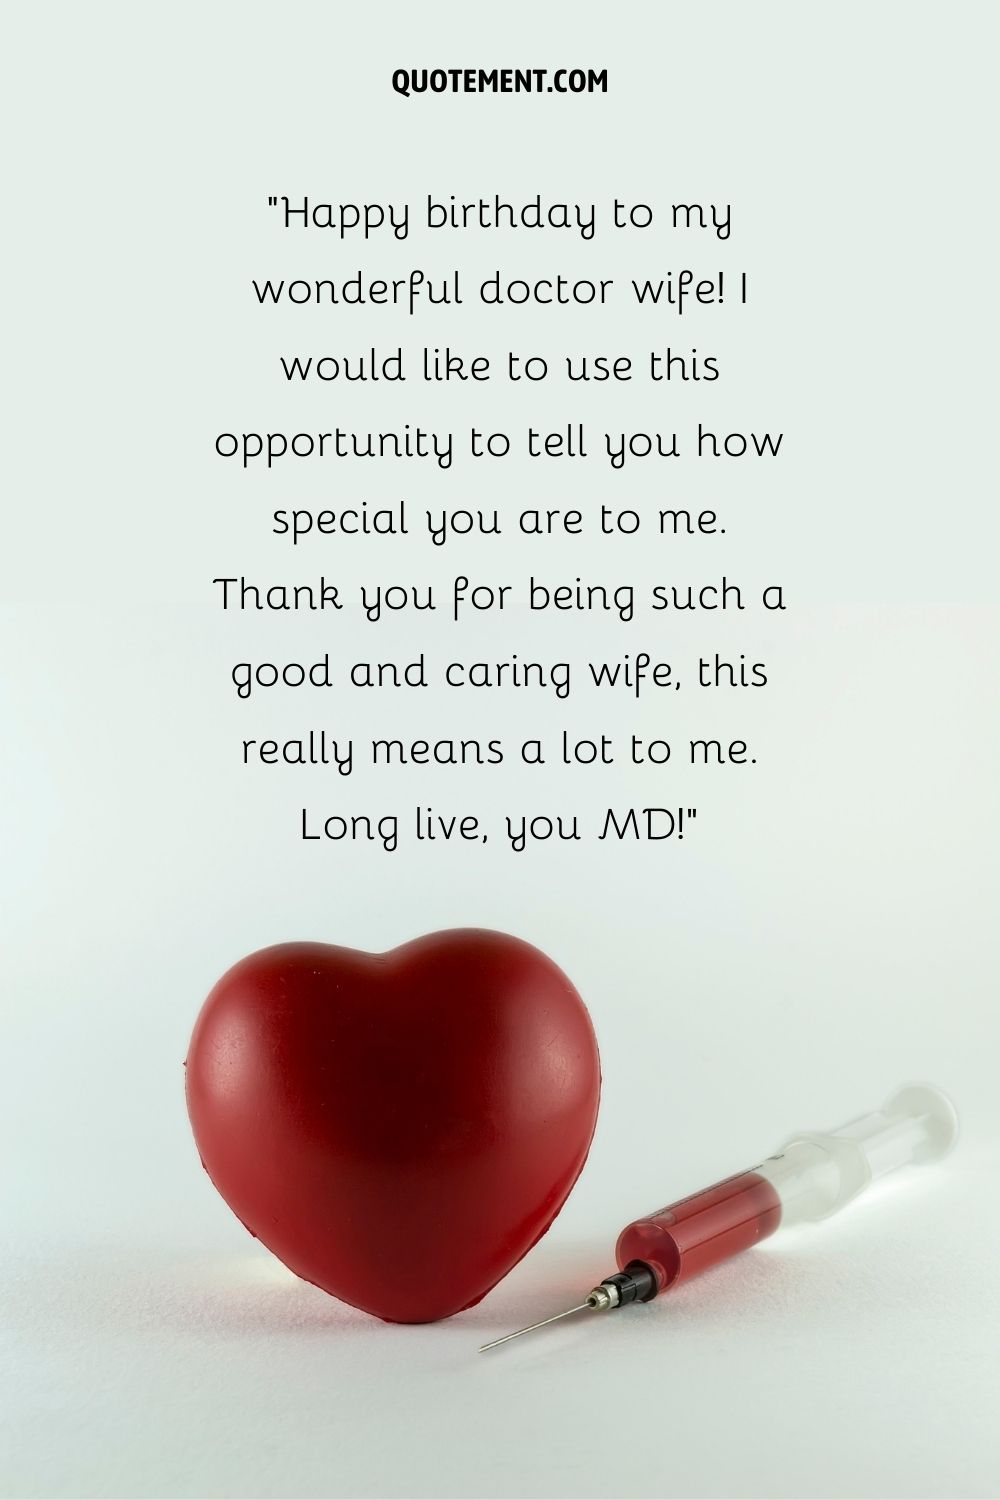 special happy birthday doctor wish for wife represented by syringe and a heart